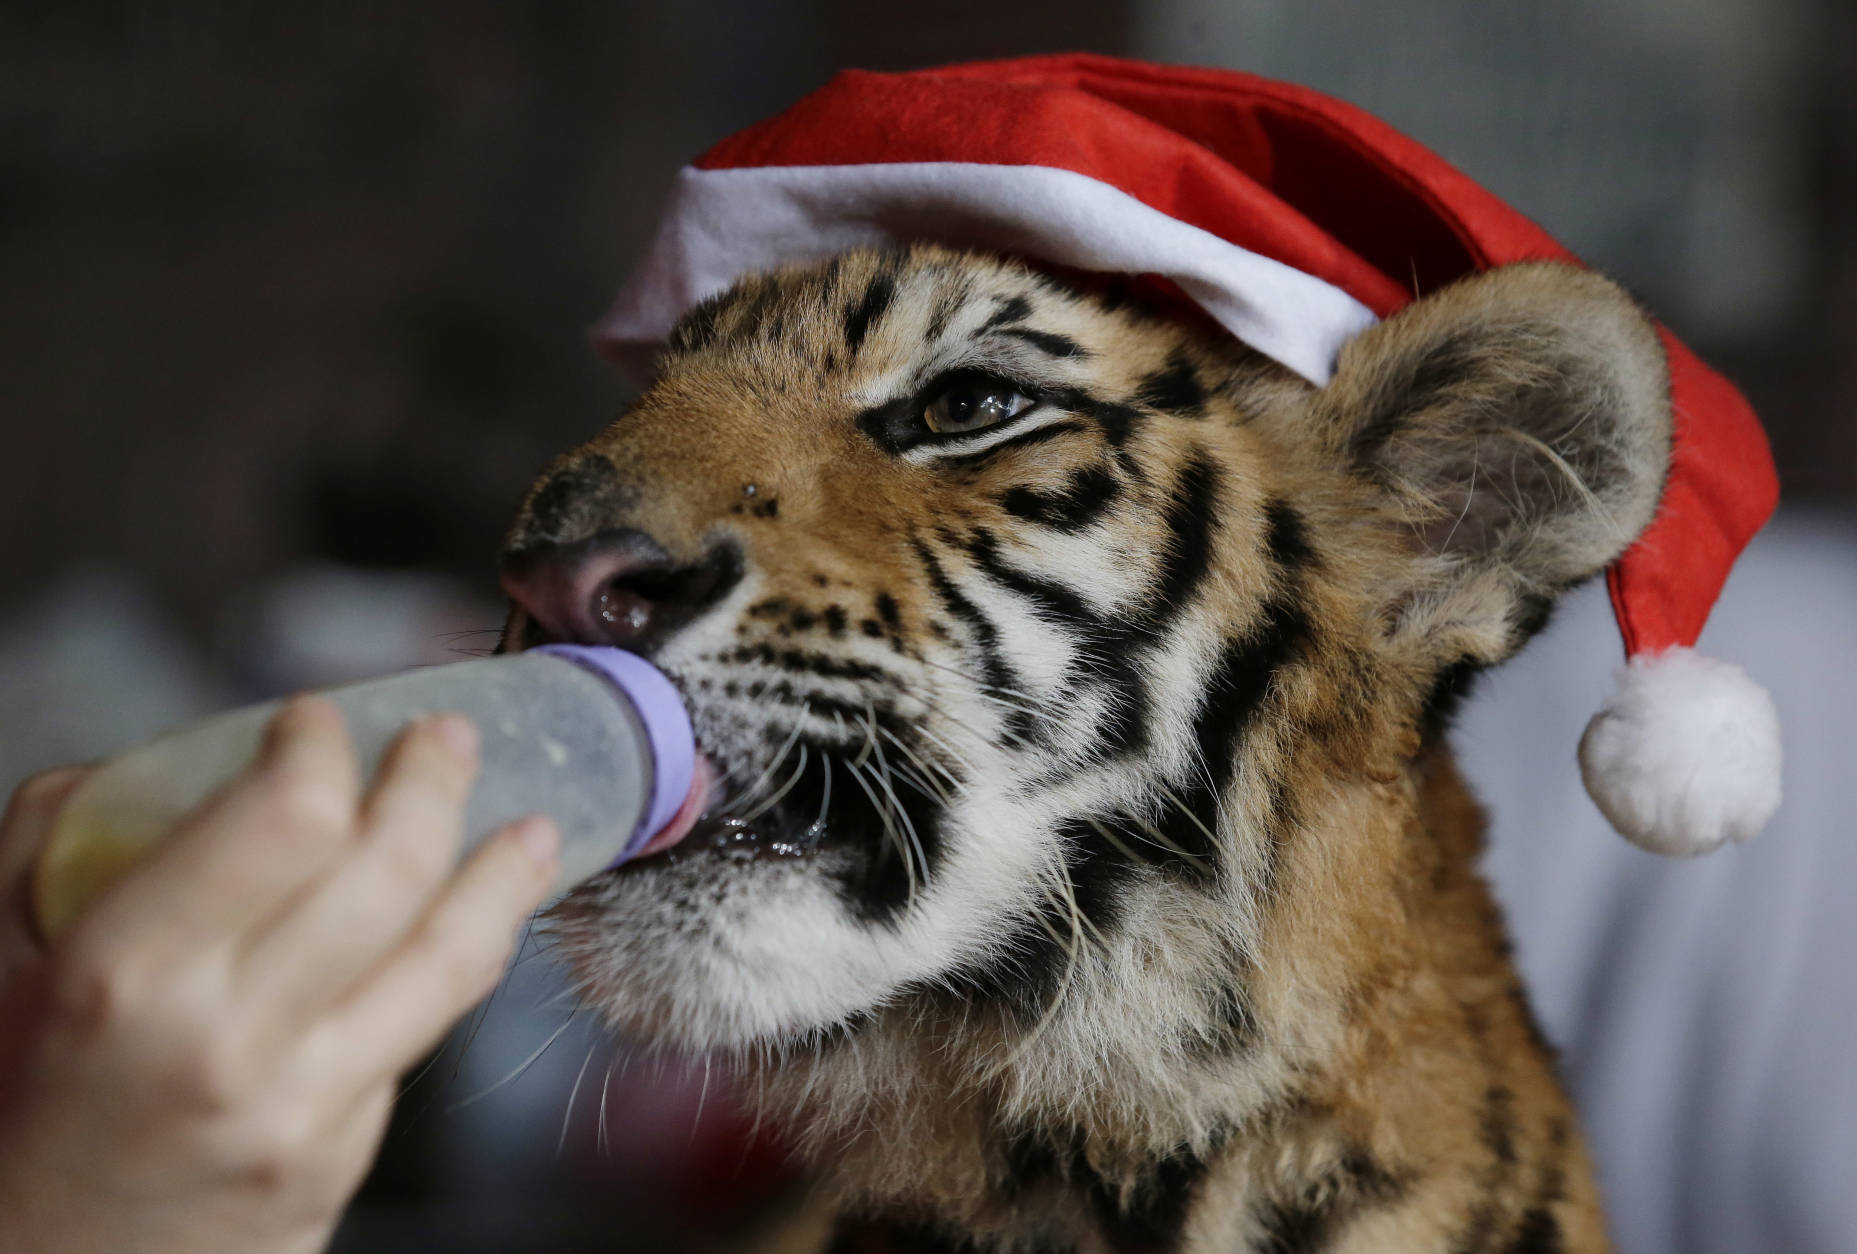 A Bengal tiger cub named "Tiger Duterte" is bottle fed during their annual "Animal Christmas Party" at the Malabon Zoo in Malabon, north of Manila, Philippines Wednesday, Dec. 21, 2016. The zoo also gave away Christmas gifts to orphans during the event. (AP Photo/Aaron Favila)